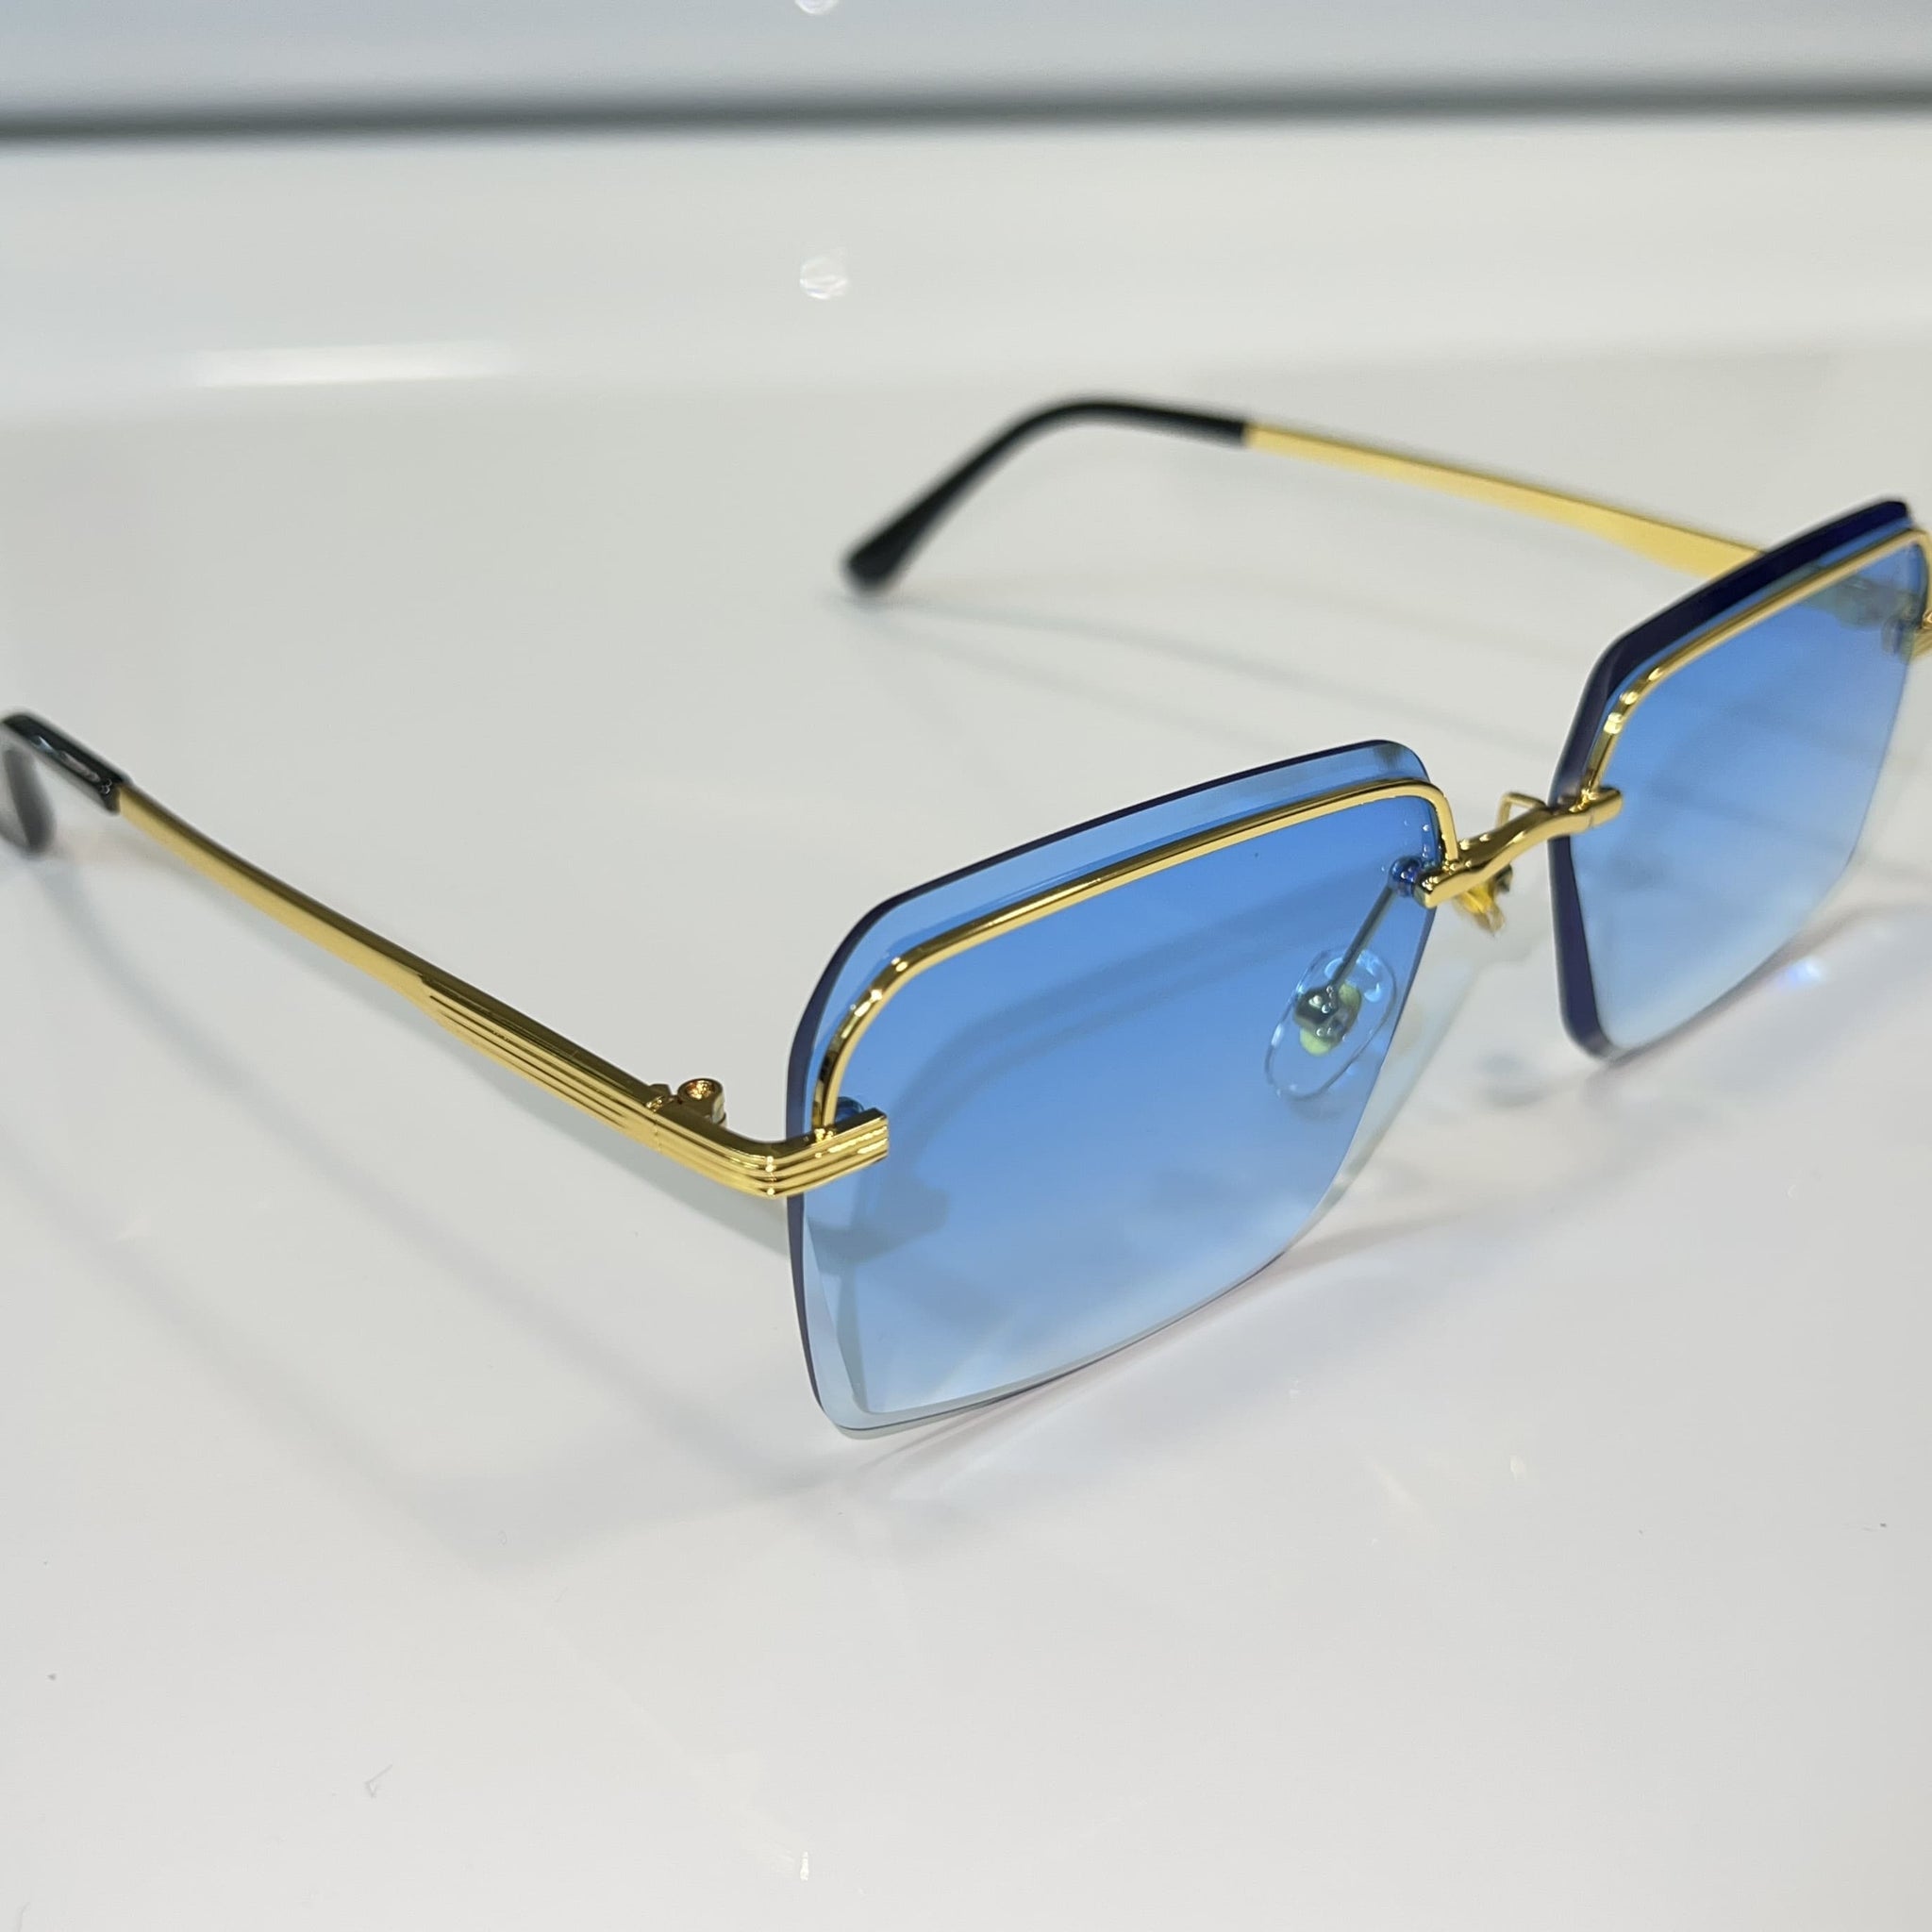 Invincible Glasses - 14k gold plated - Blue Shade - Sehgal Glasses